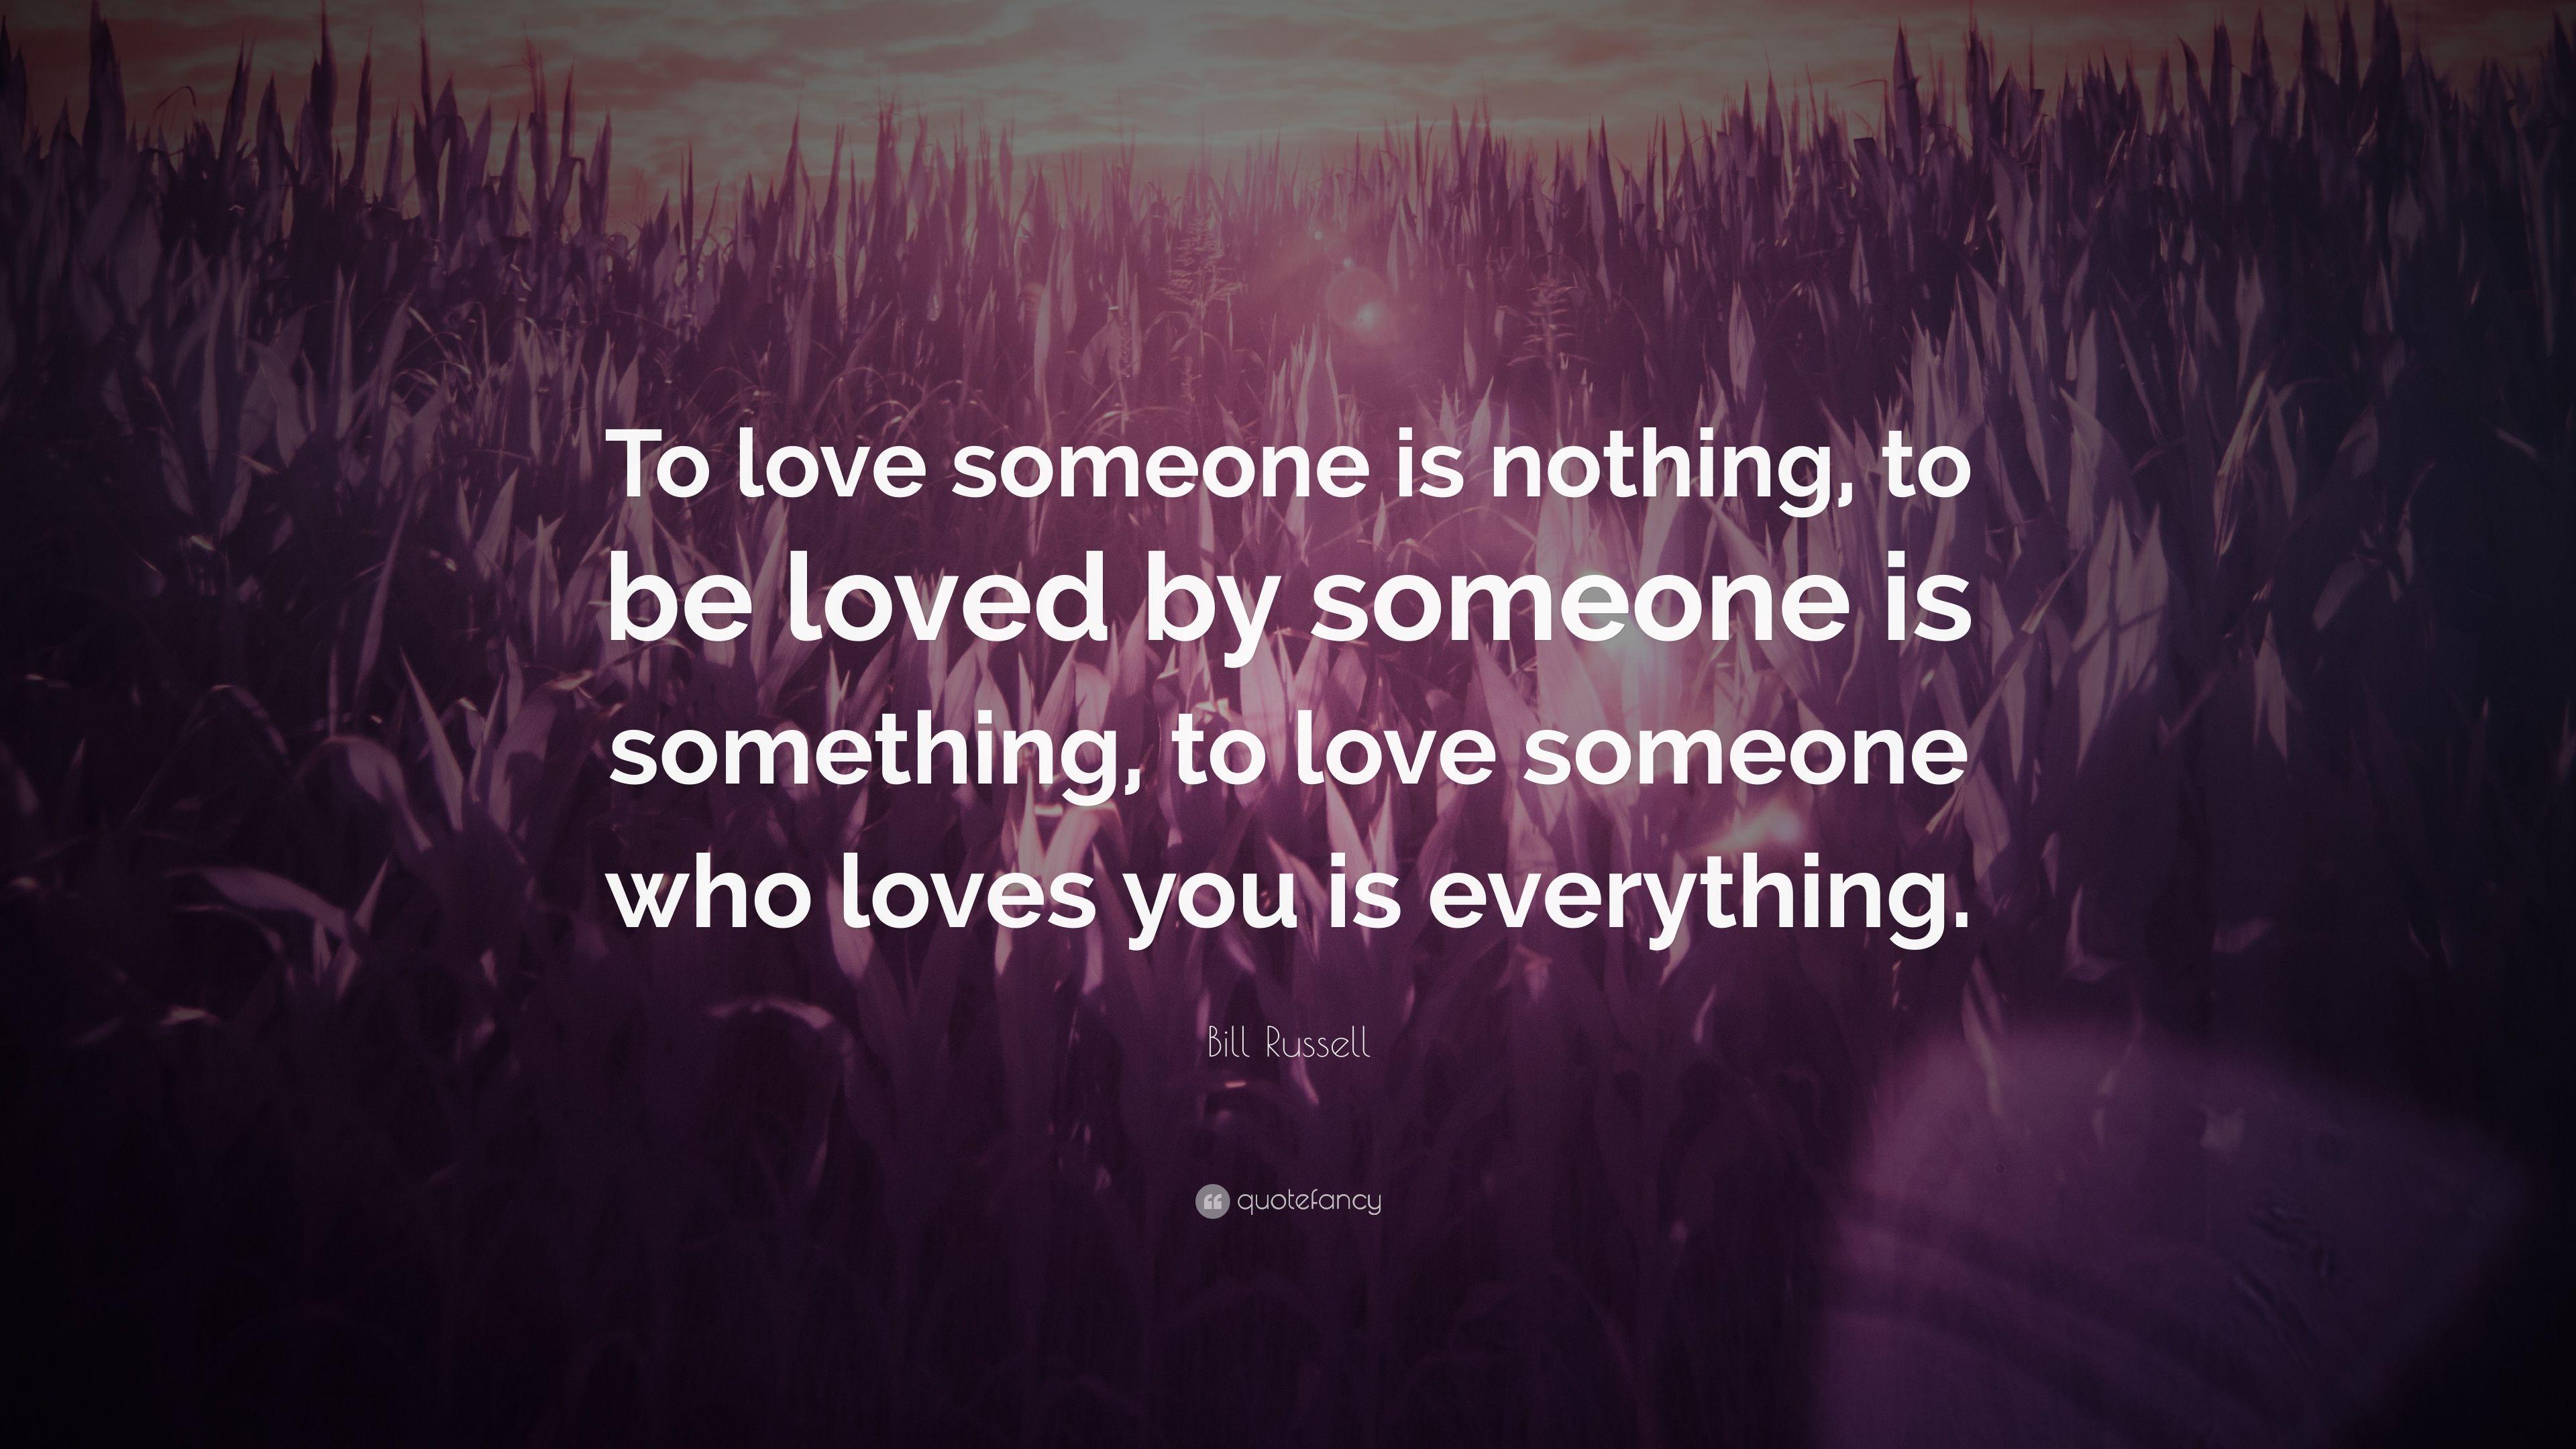 Bill Russell Quote: “To love someone is nothing, to be loved